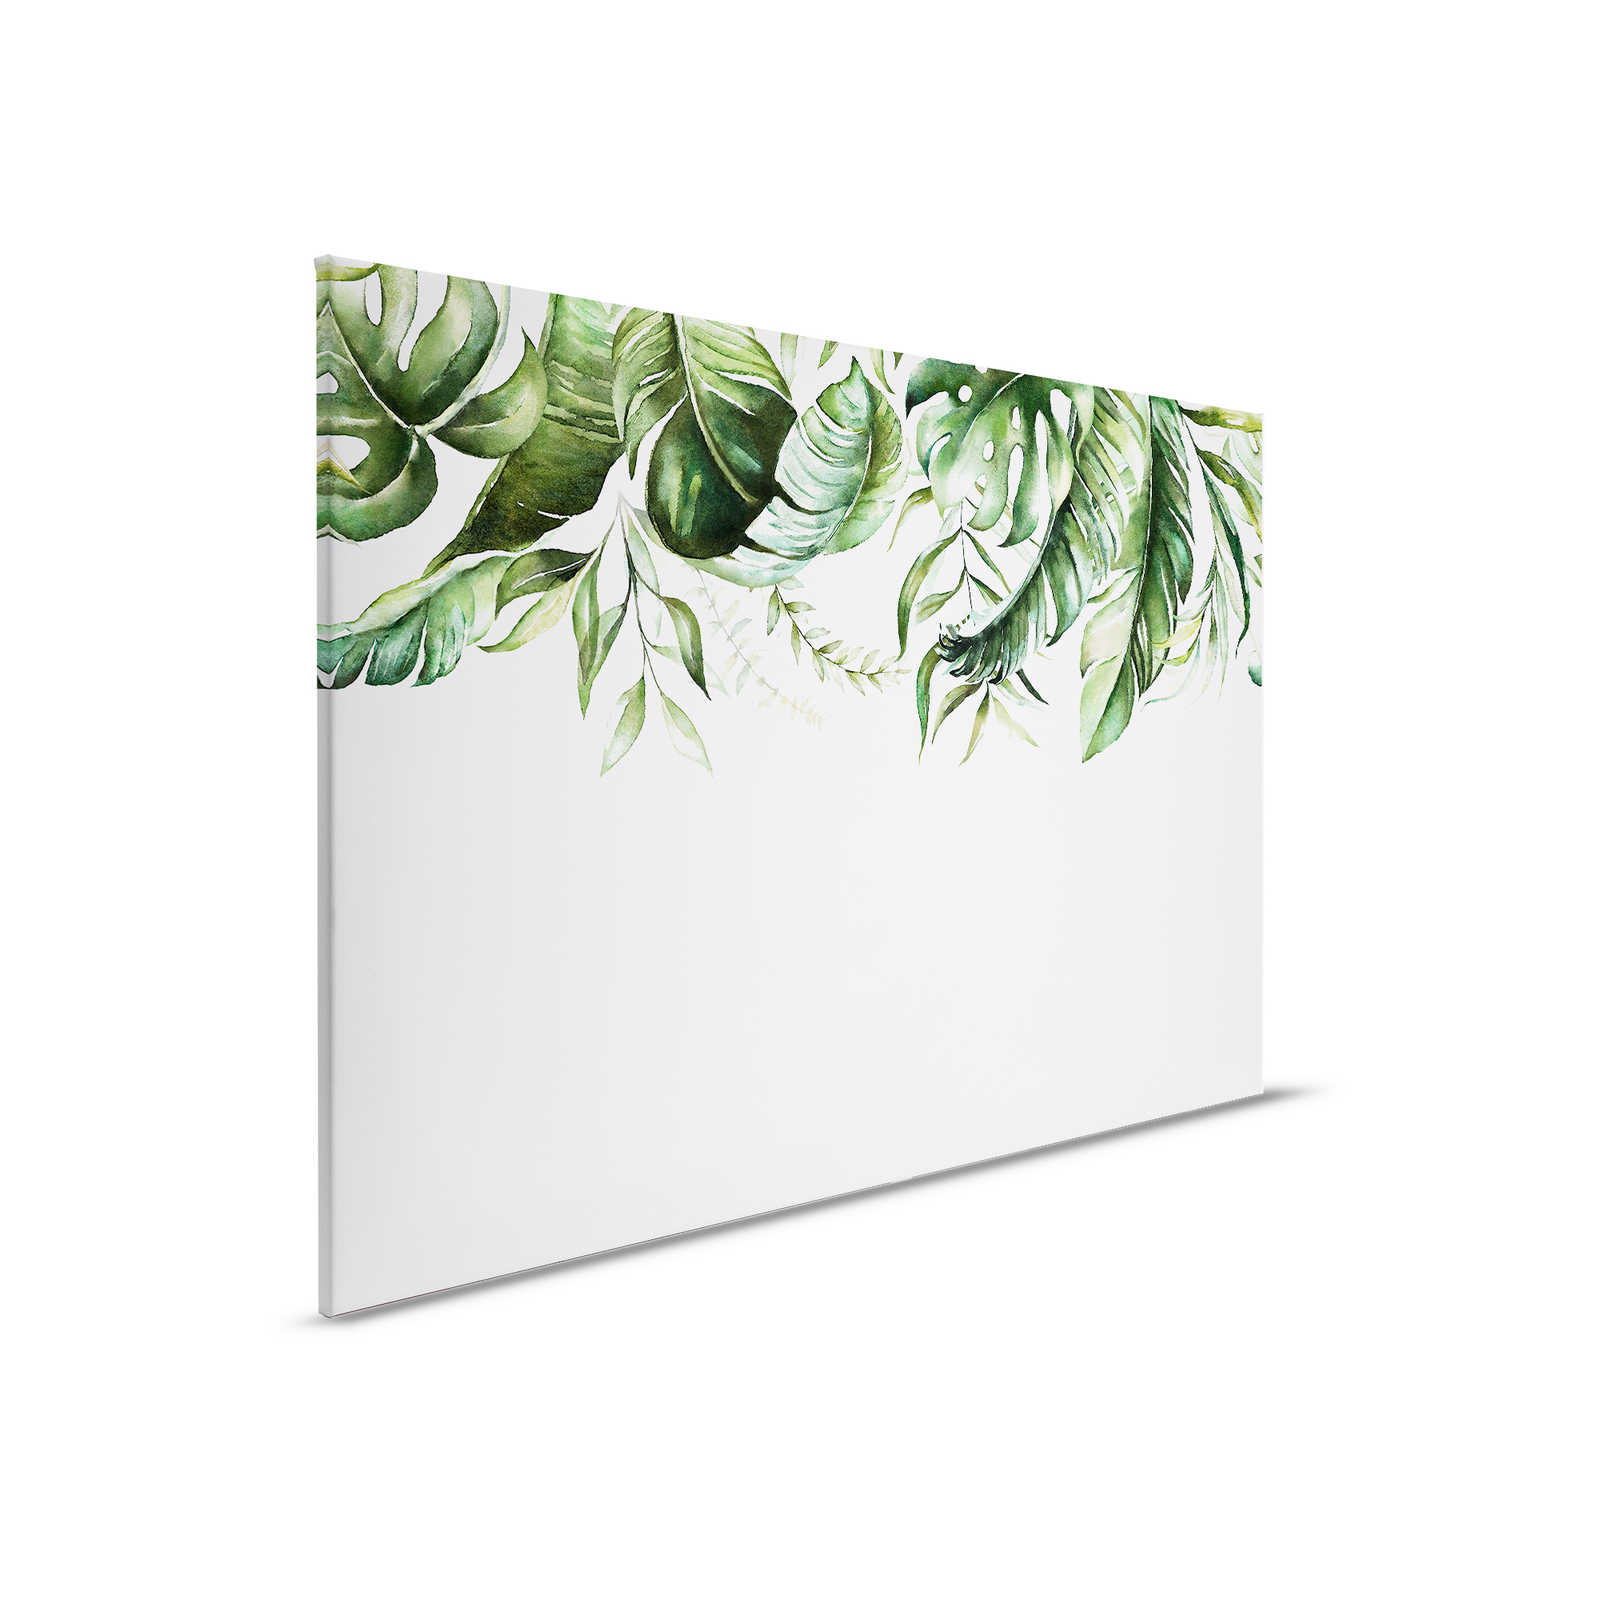         Canvas painting with tropical leaf tendrils on a wall - 0.90 m x 0.60 m
    